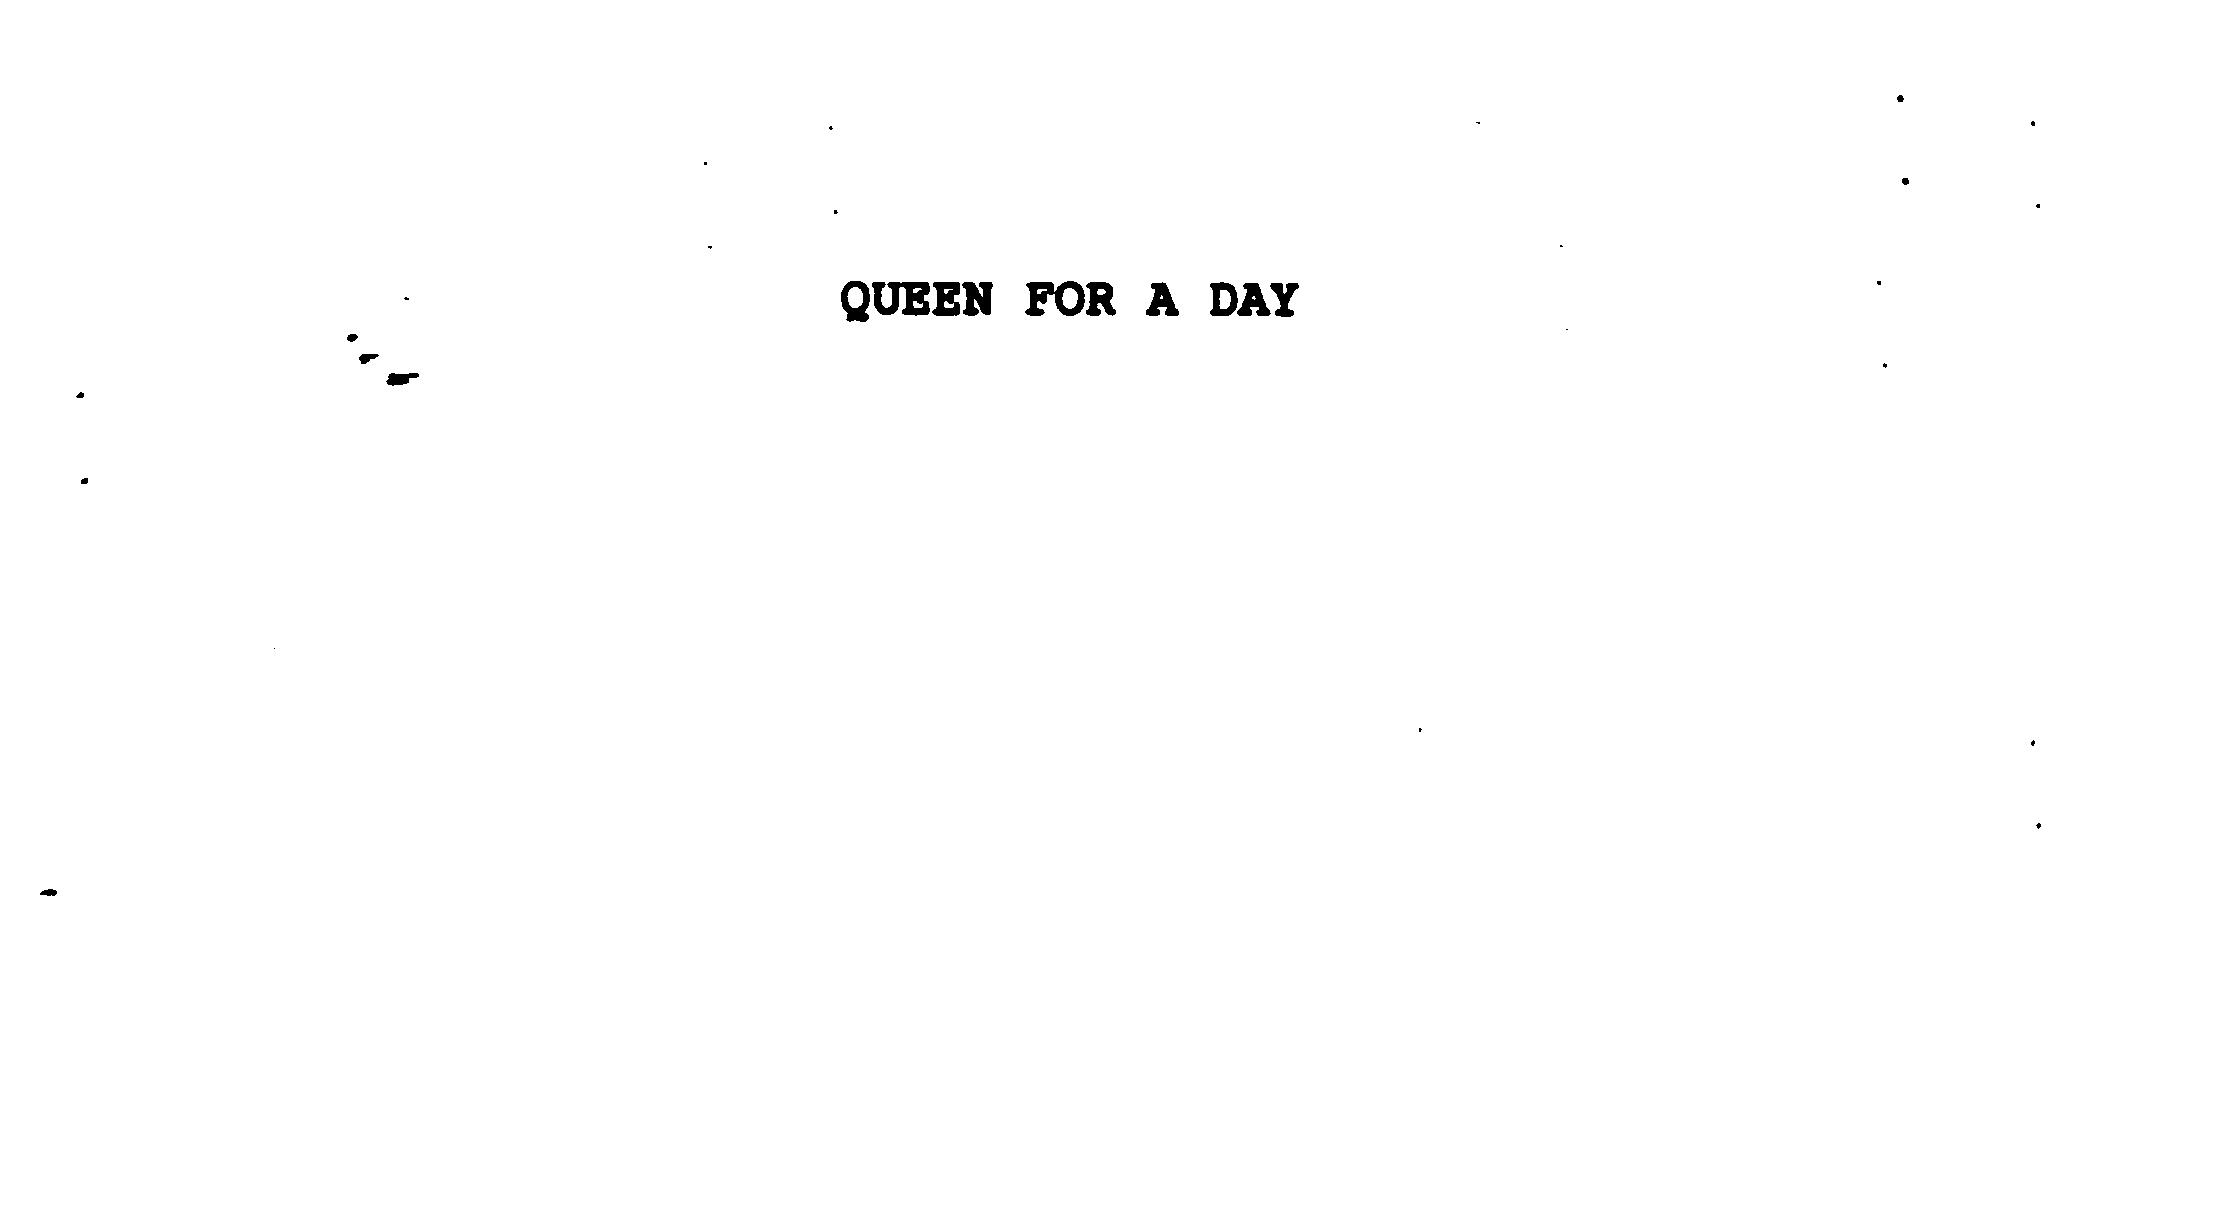 QUEEN FOR A DAY